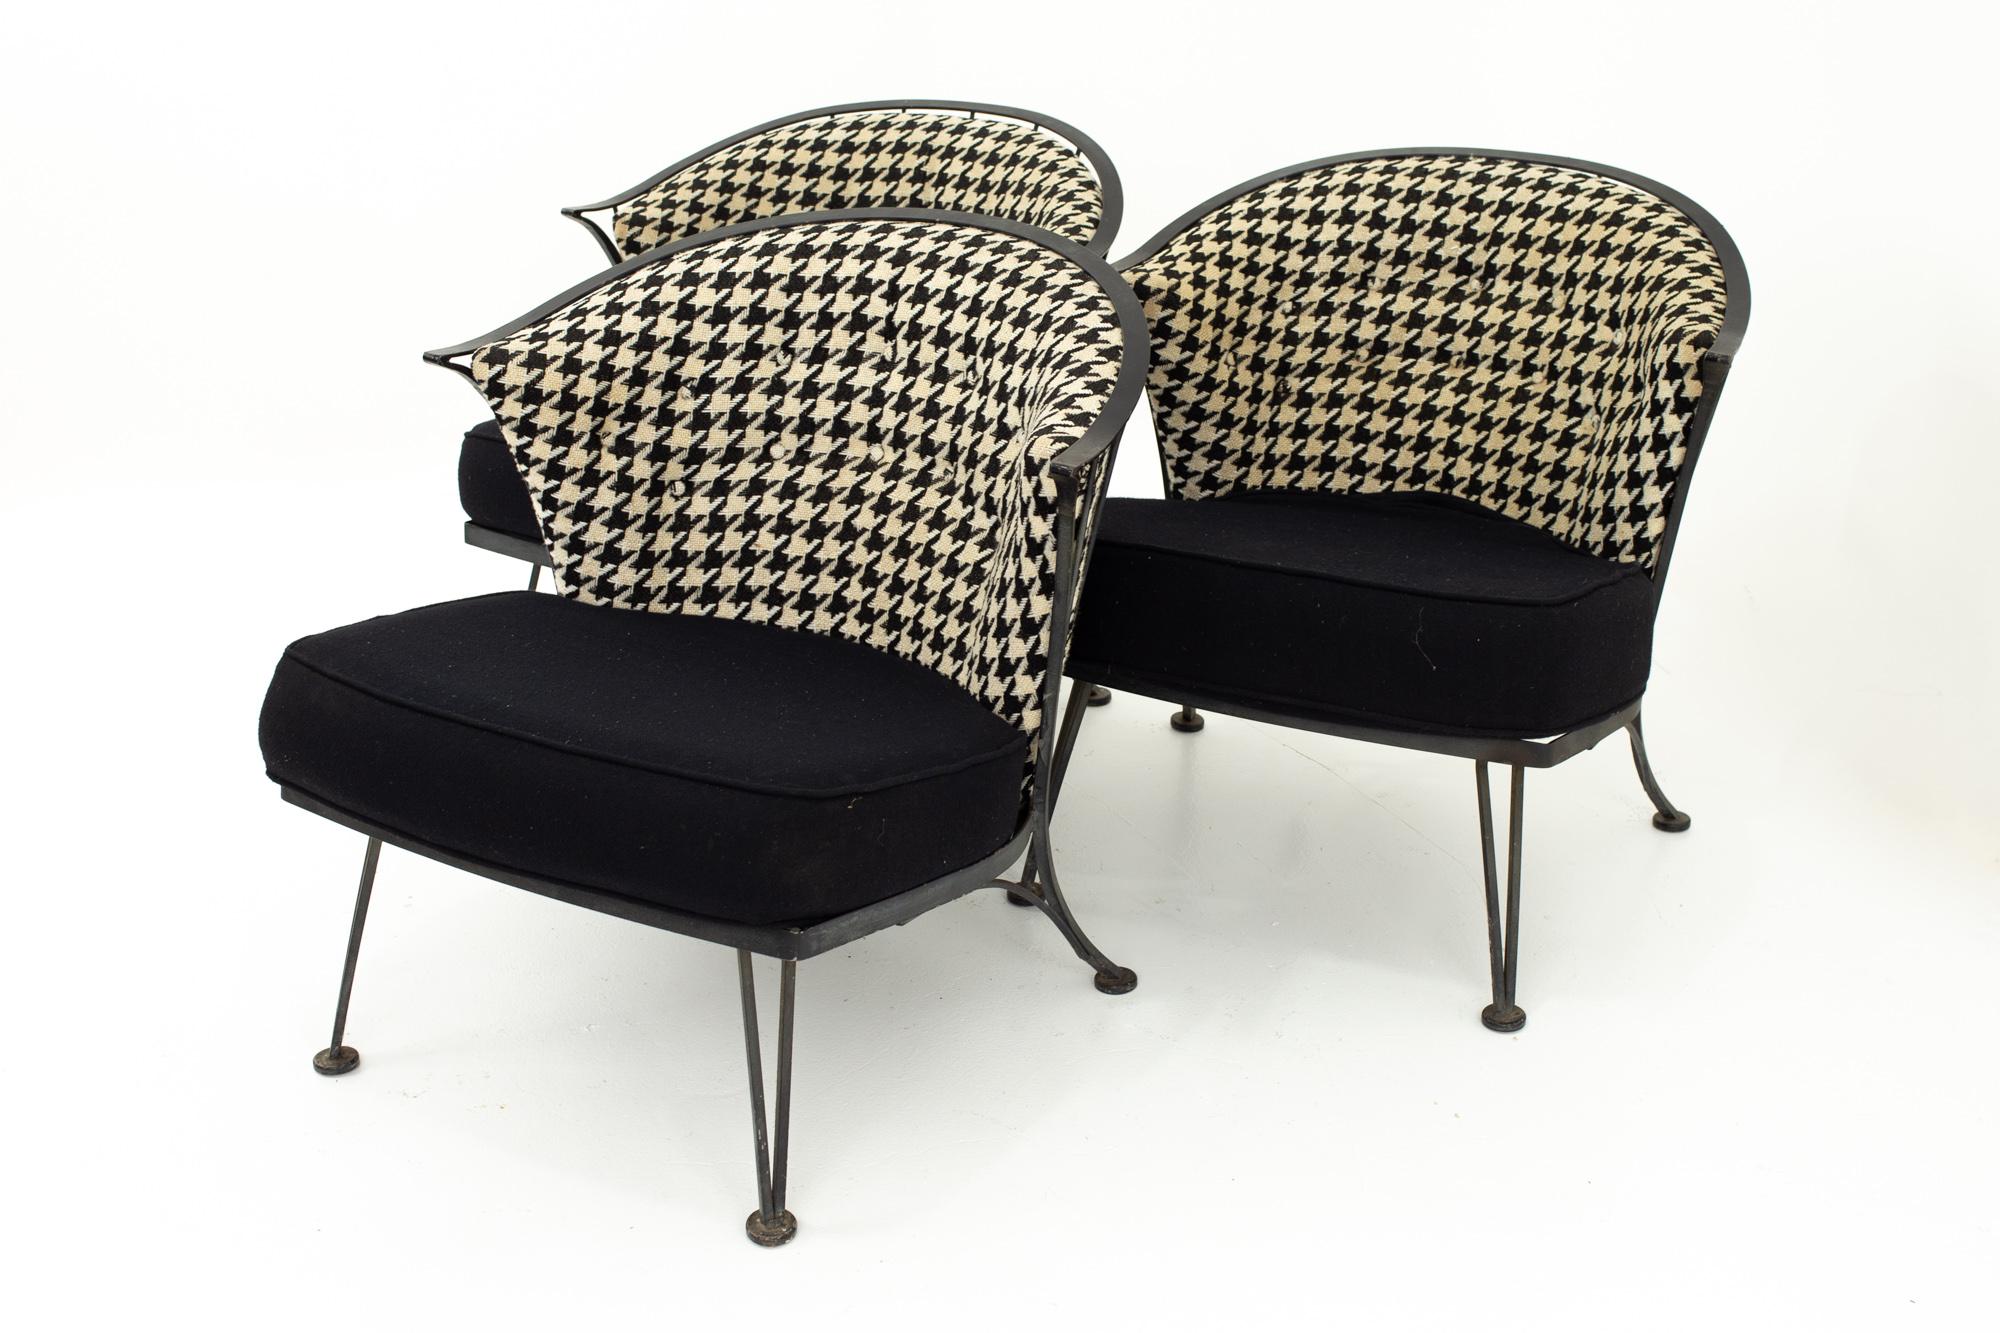 Salterini Mid Century Outdoor Wrought Iron and Black and White Houndstooth Patio Chairs - Set of 3

Each chair measures: 30 wide x 29 deep x 28 high with a seat height of 18 inches

This set is available in what we call Restored Vintage